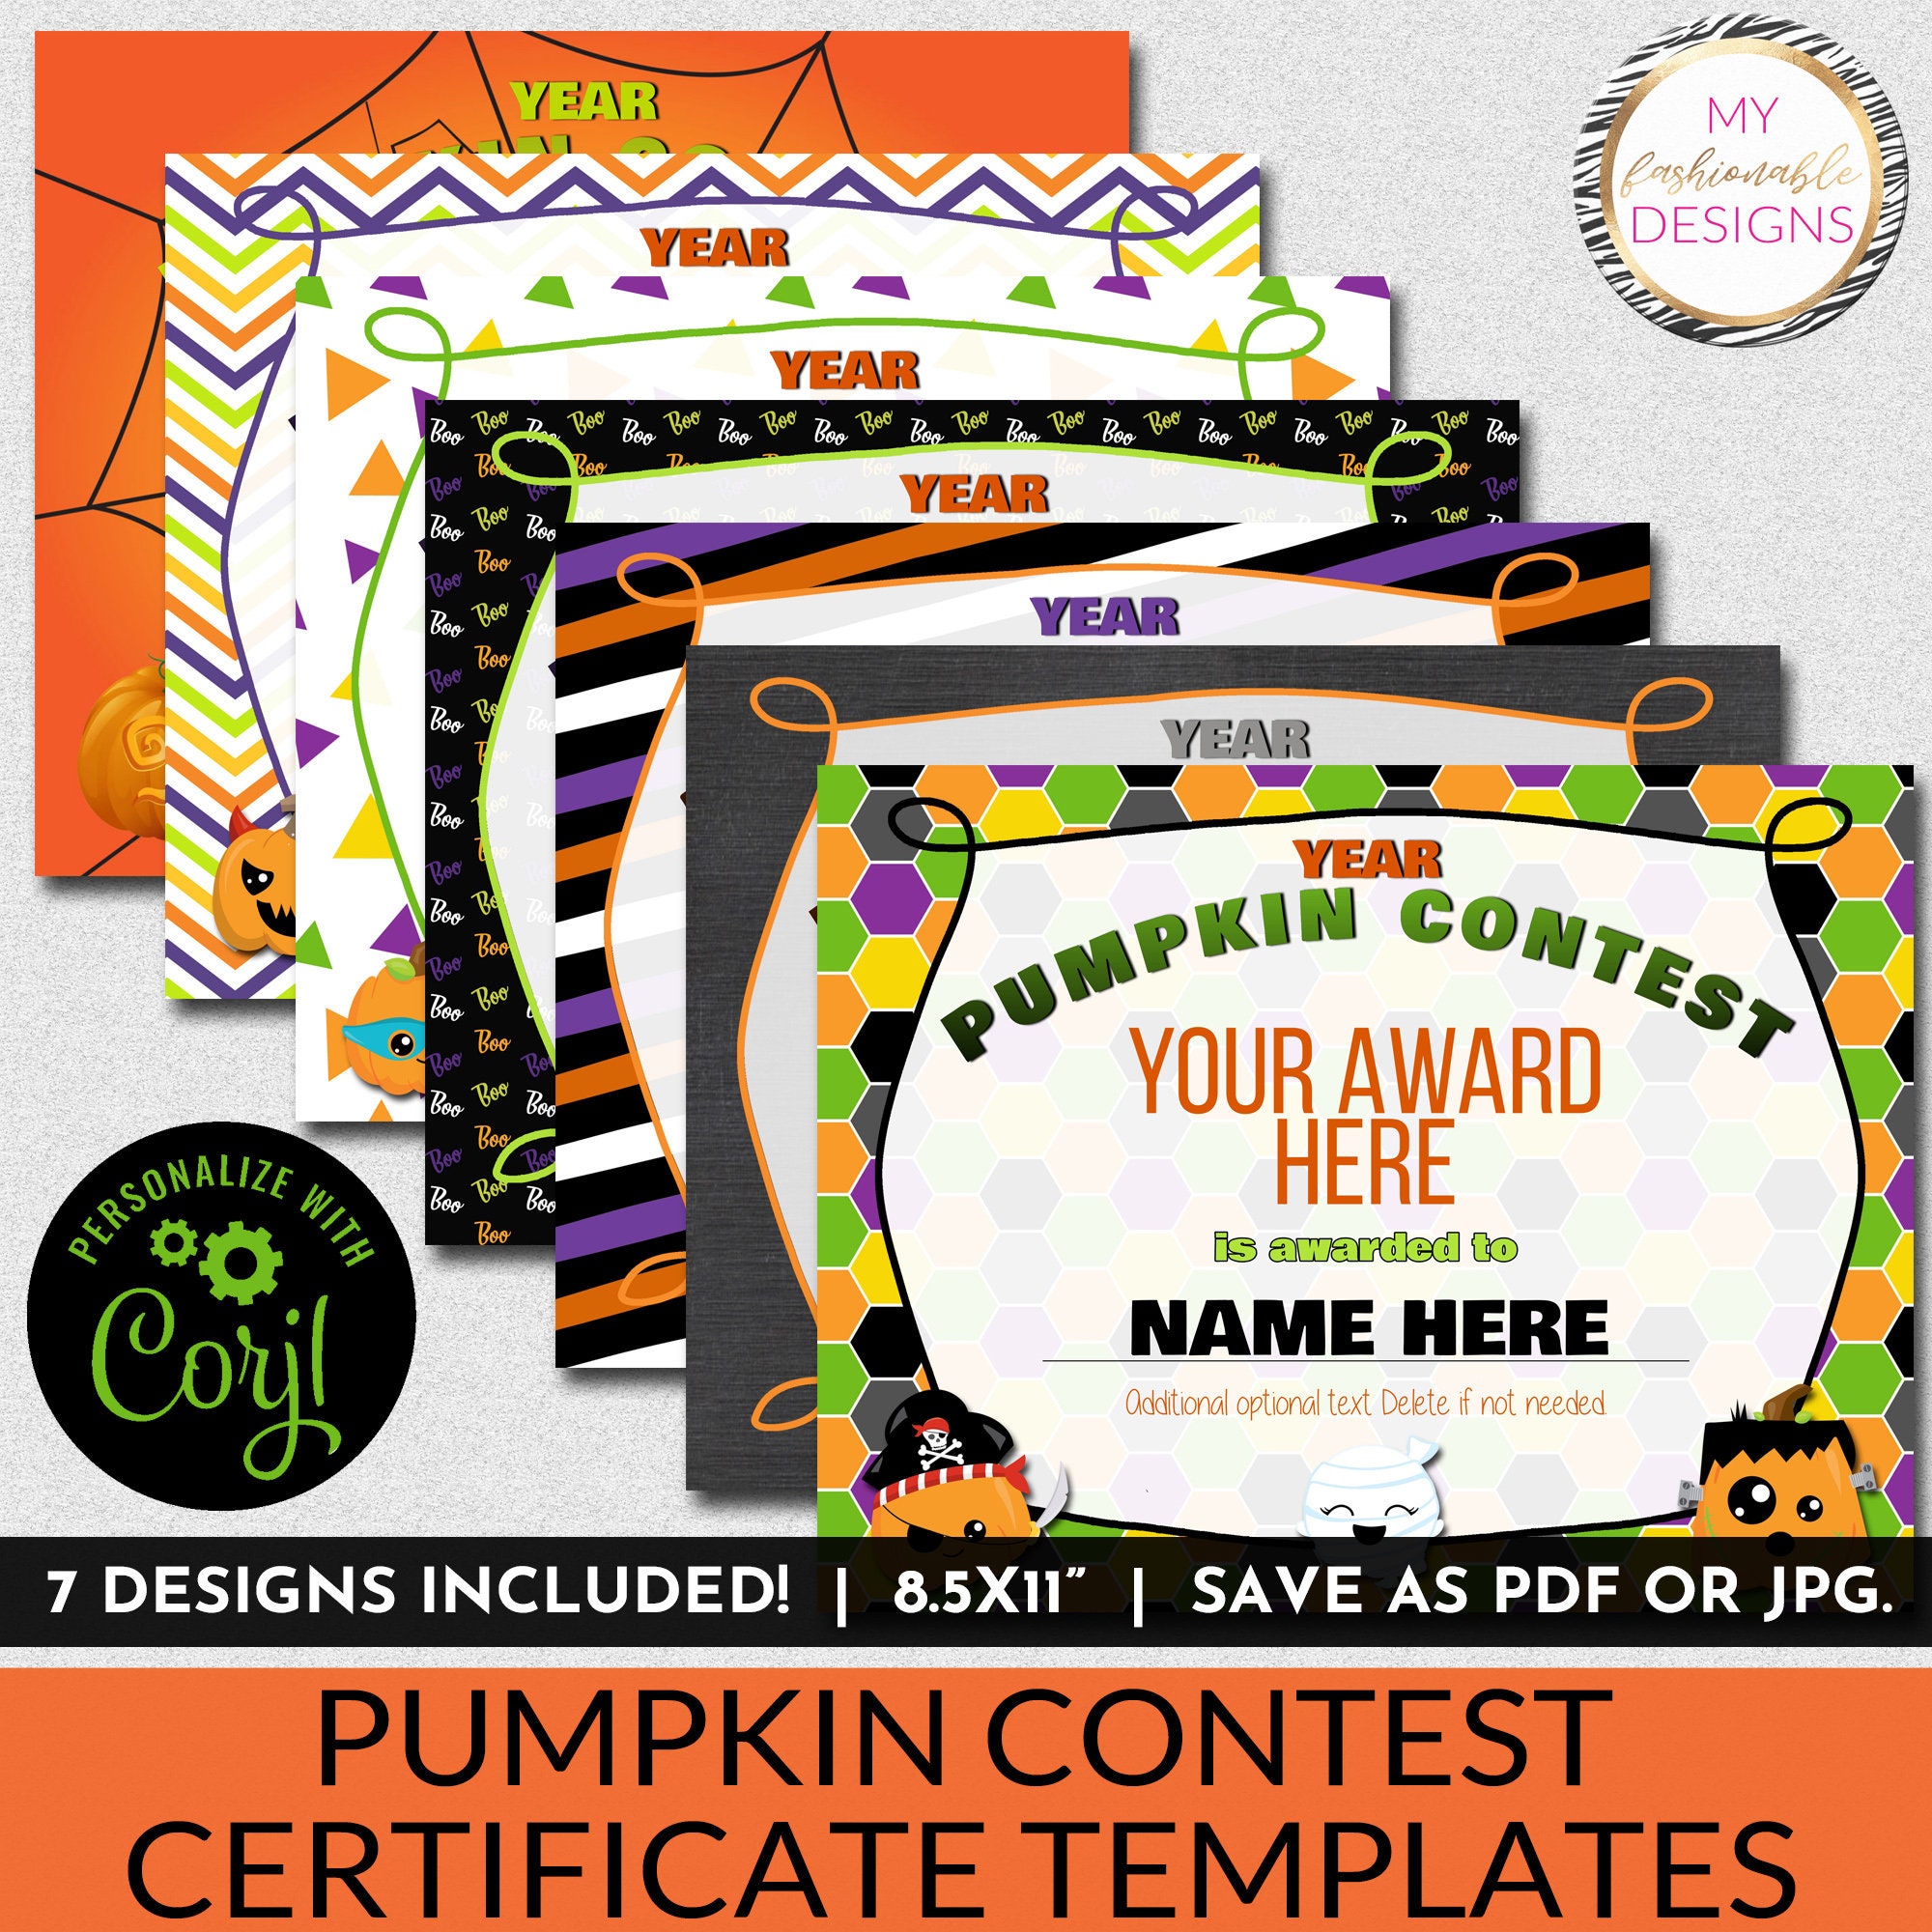 Contest-related design templates